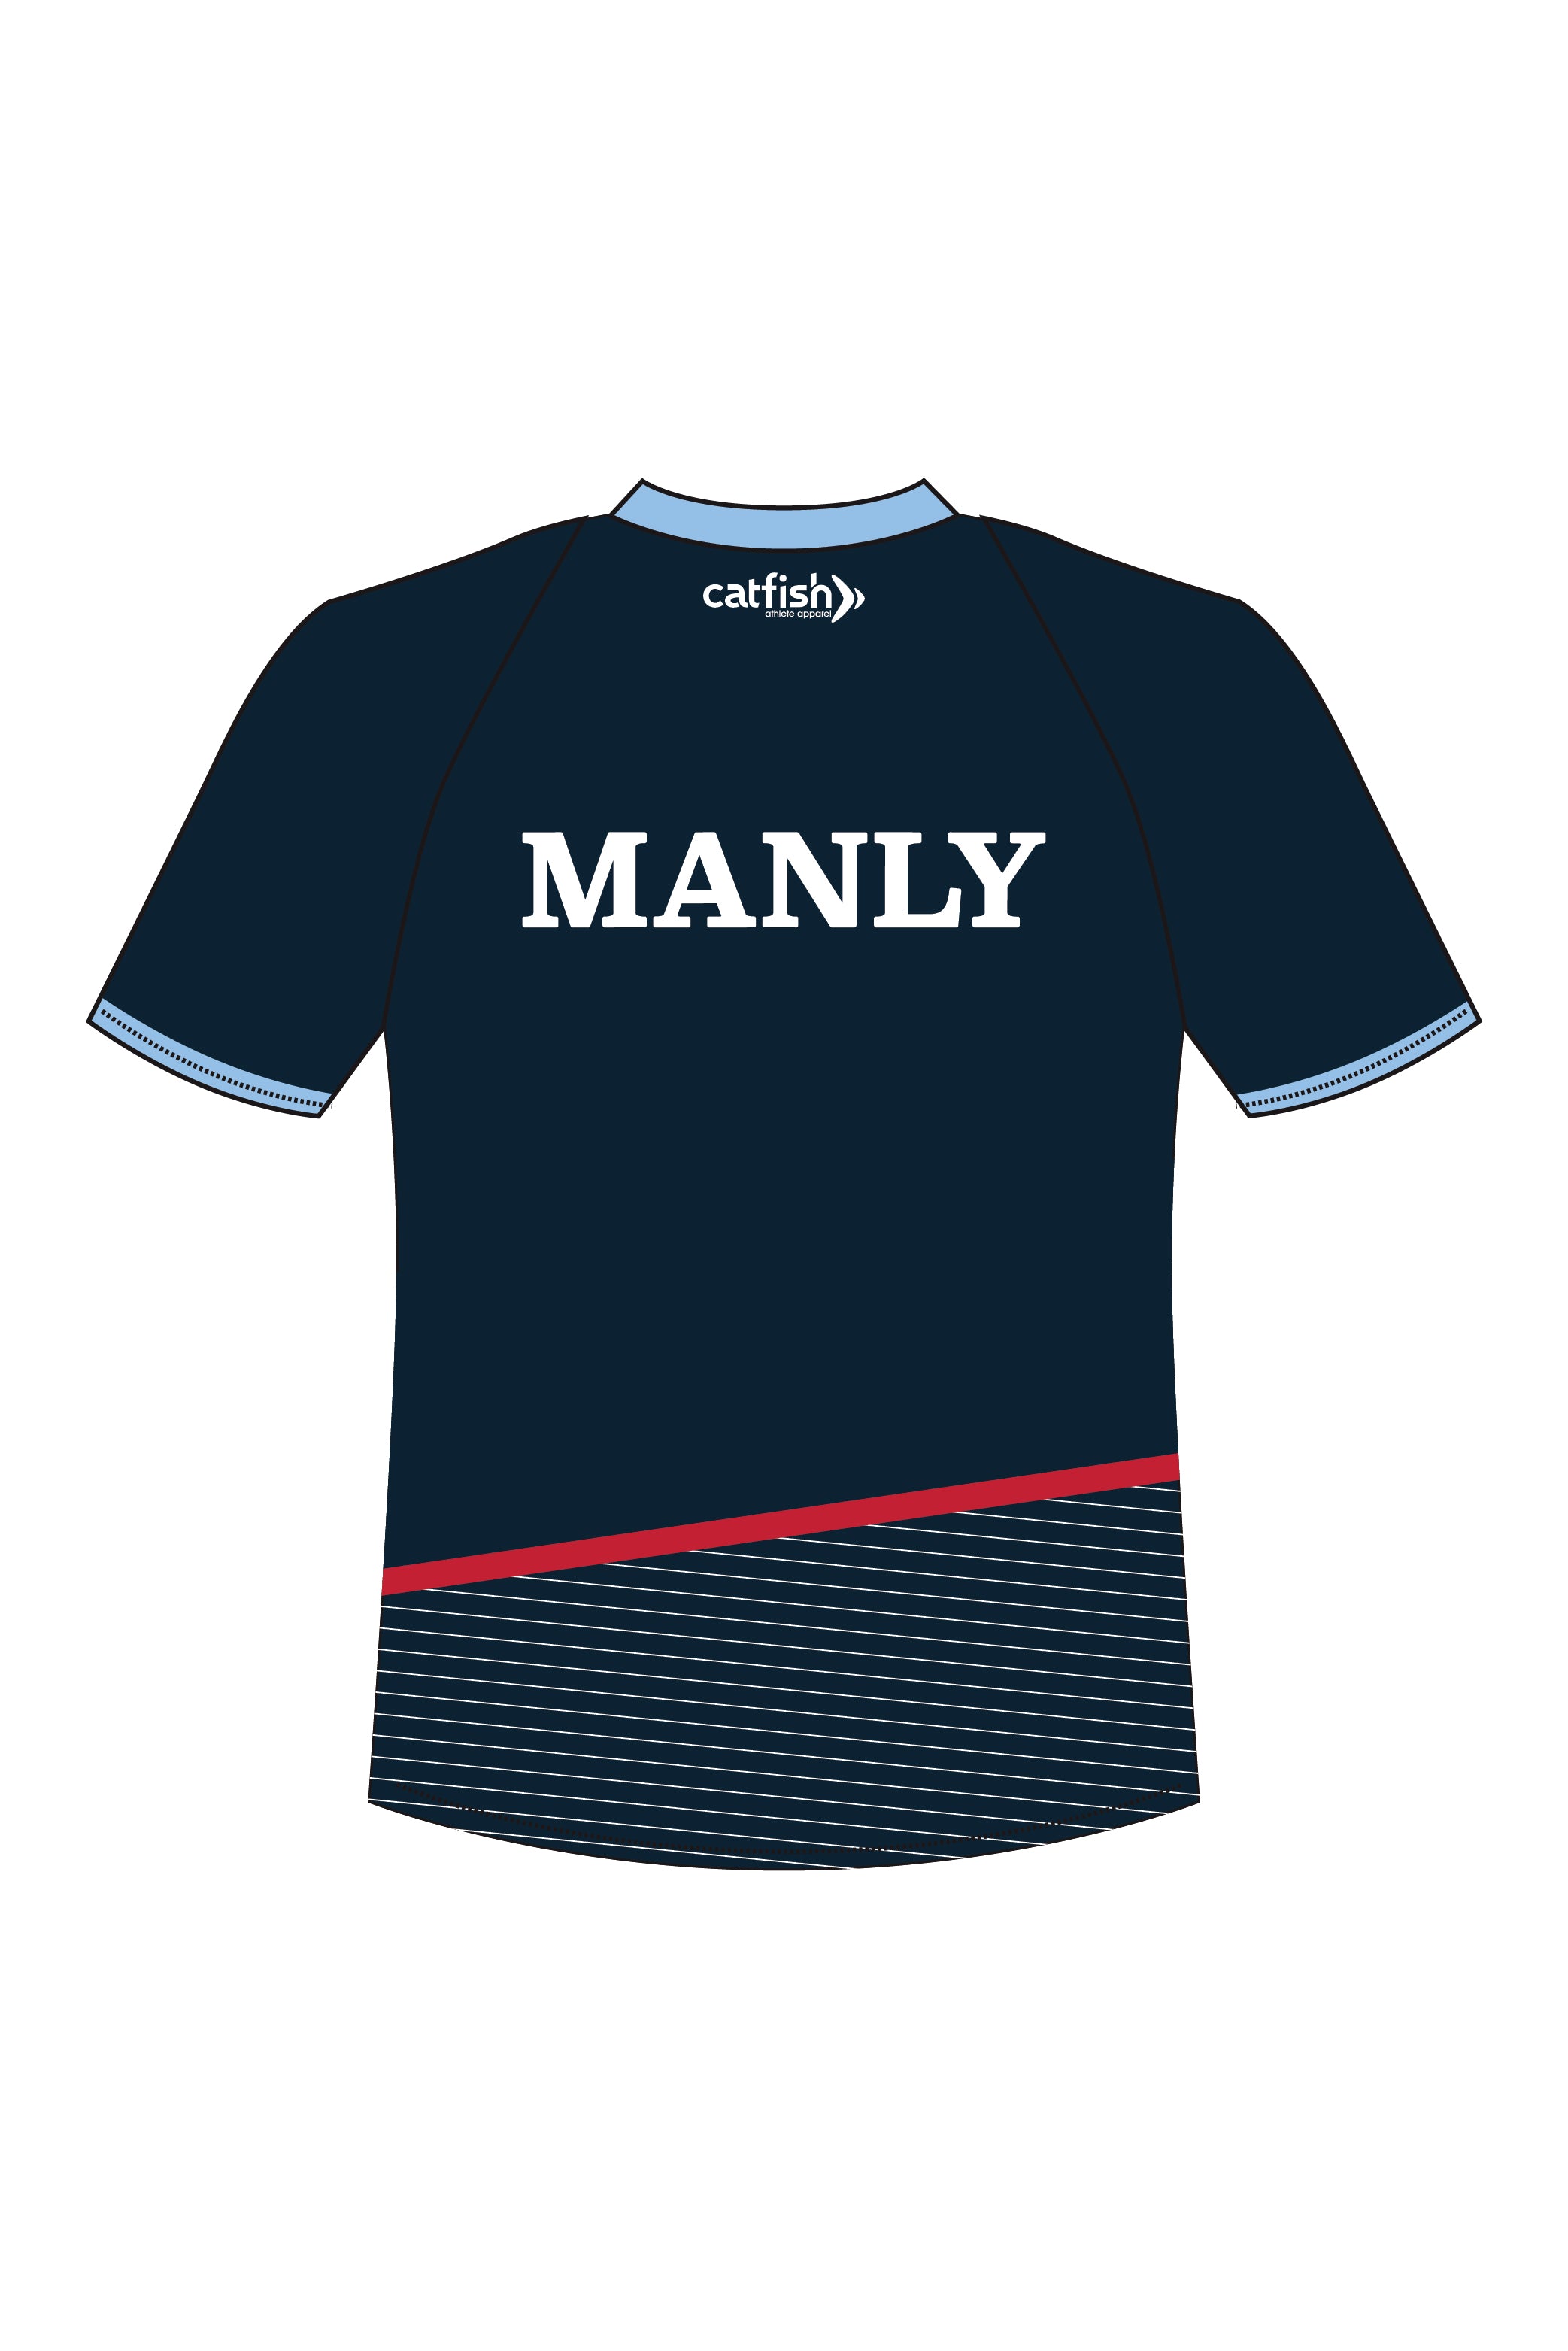 Manly Swimming Club Women's Sports Tee